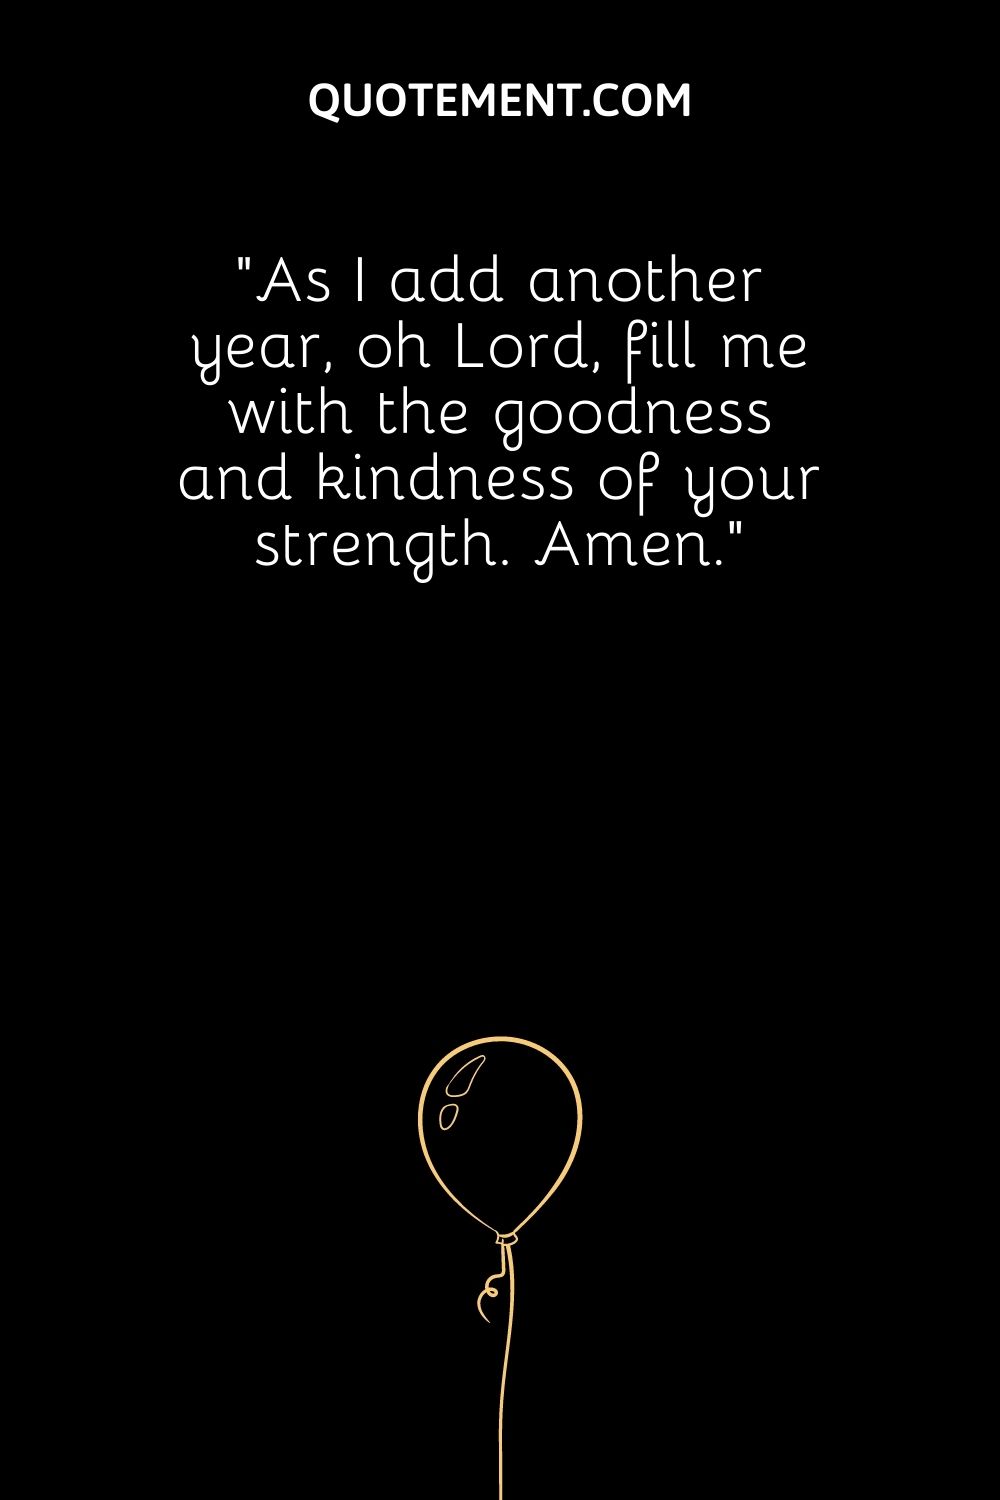 As I add another year, oh Lord, fill me with the goodness and kindness of your strength